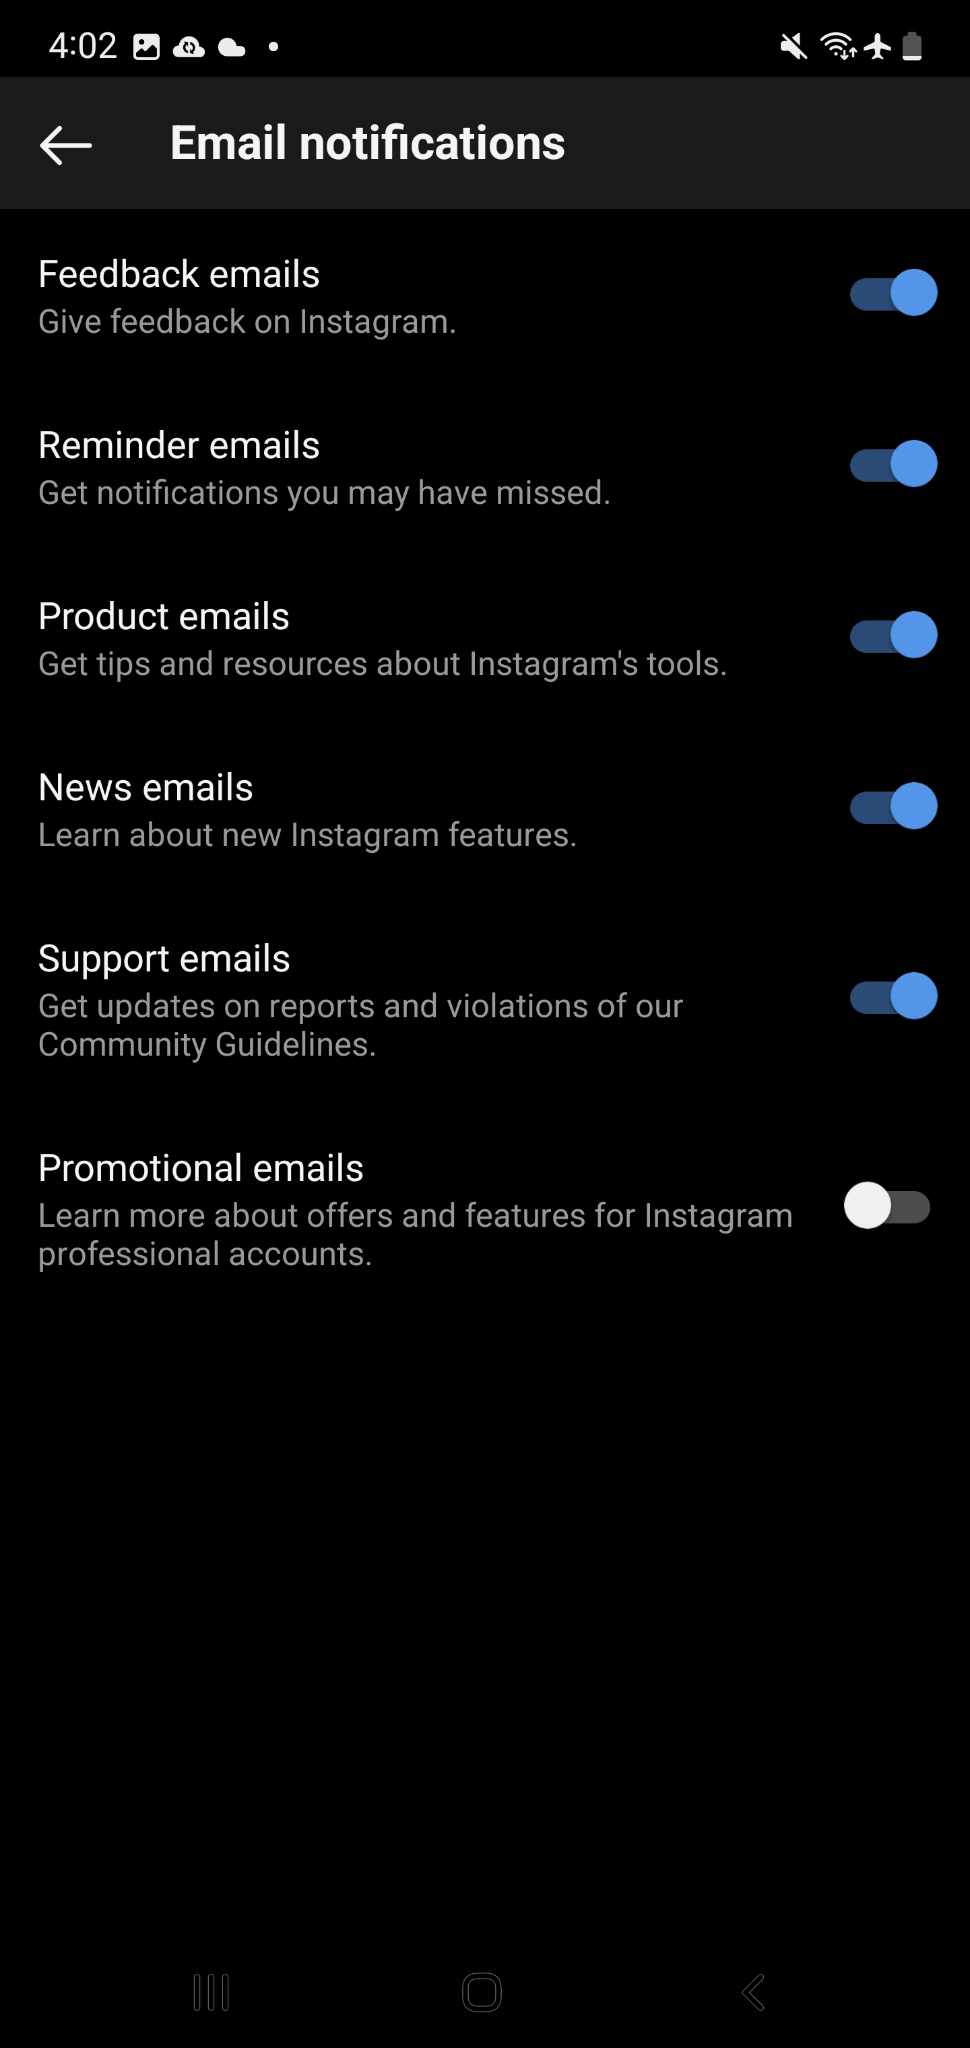 Email notifications on Instagram